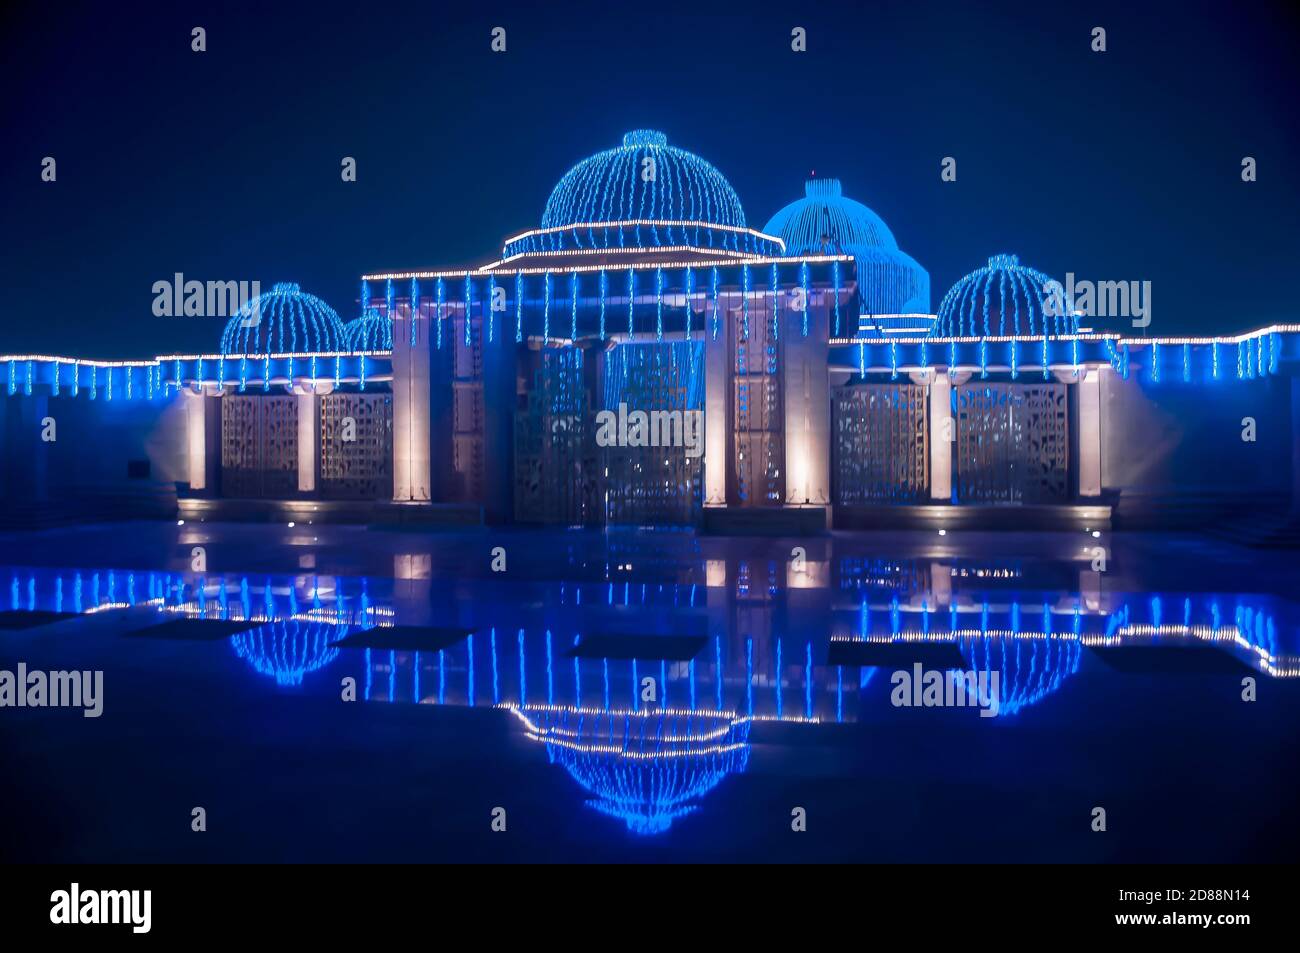 Night view of Kashiram memorial illuminated in blue light and reflections in polished floor surface, Lucknow,India Stock Photo